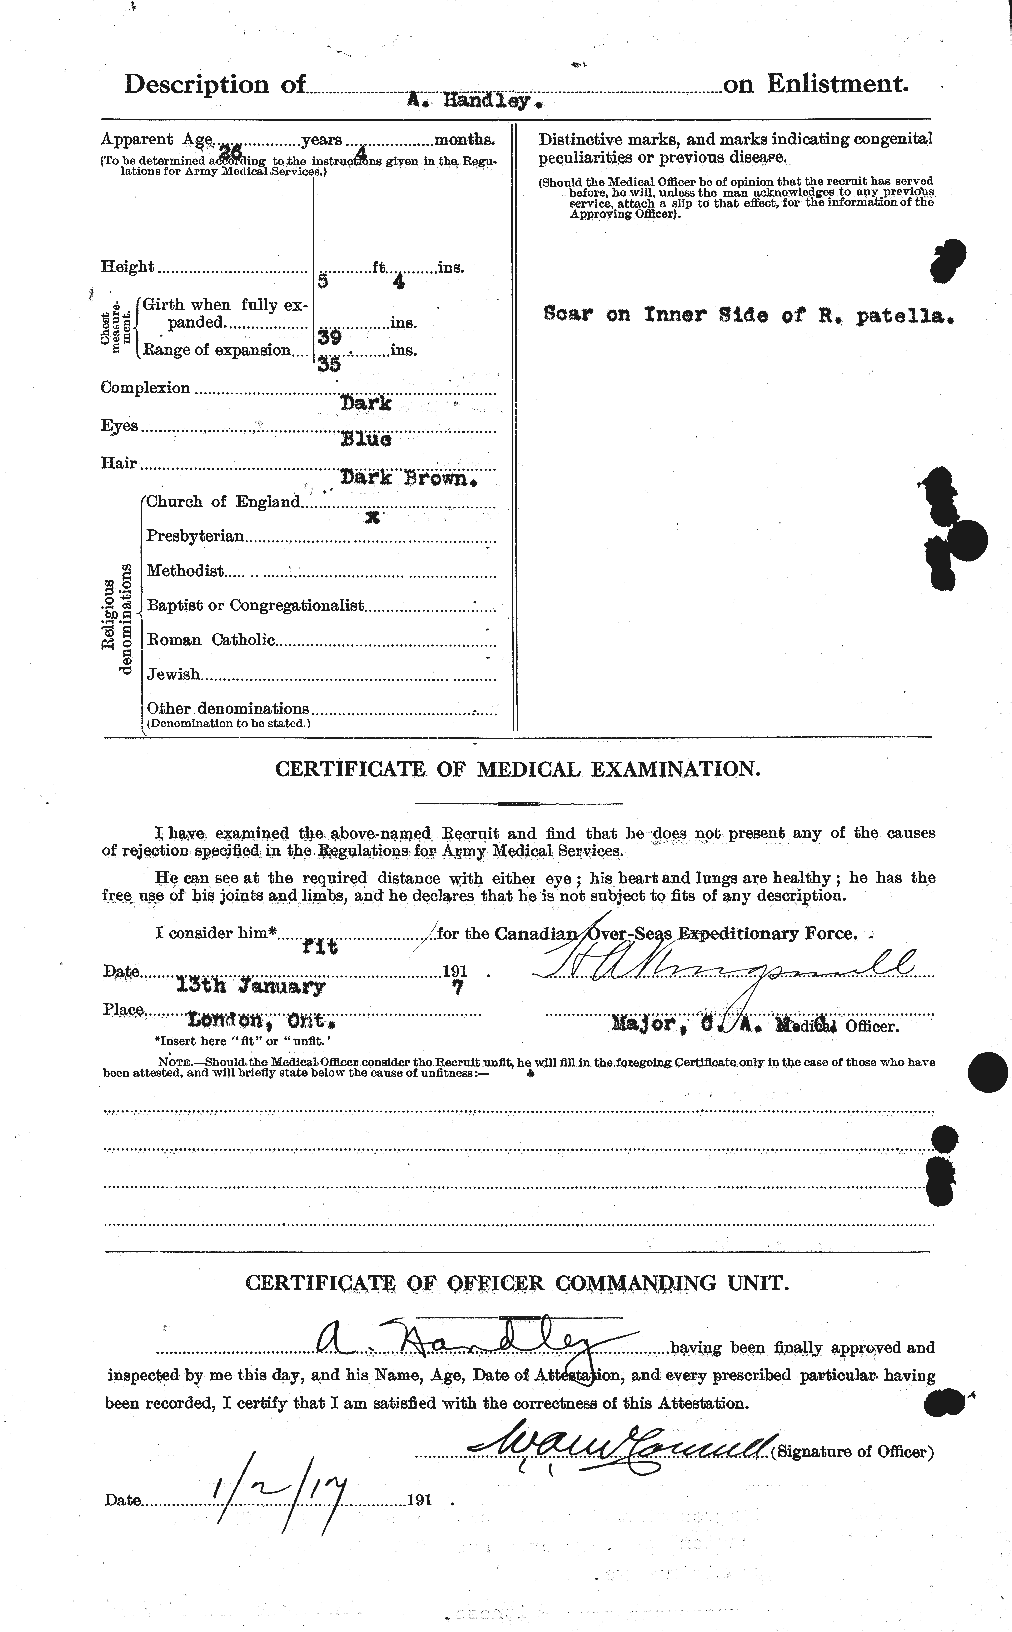 Personnel Records of the First World War - CEF 375640b